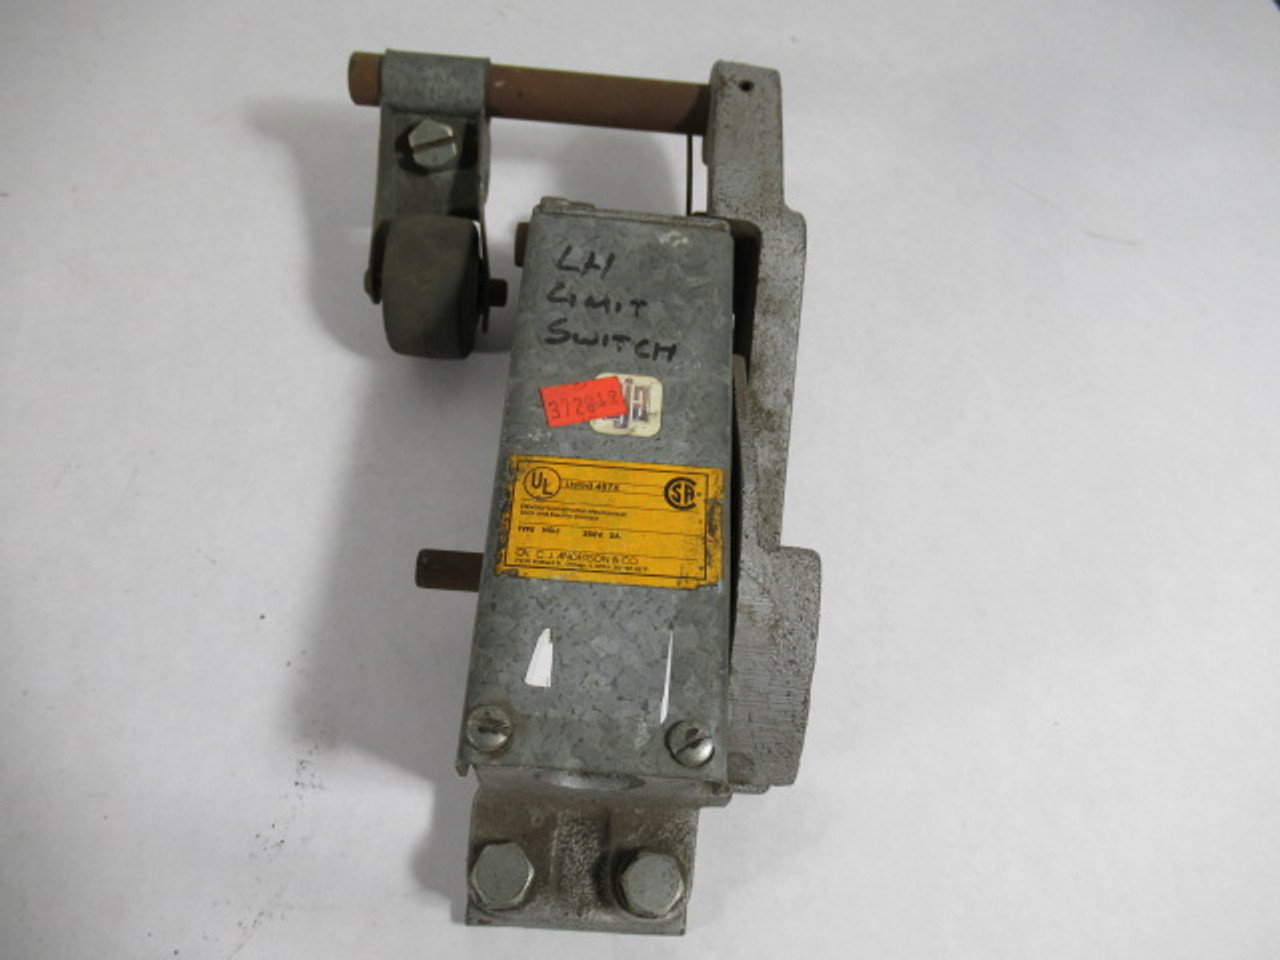 CJ Anderson 77801 HG-1 Left Hand Gate Limit Switch 250V 2A USED